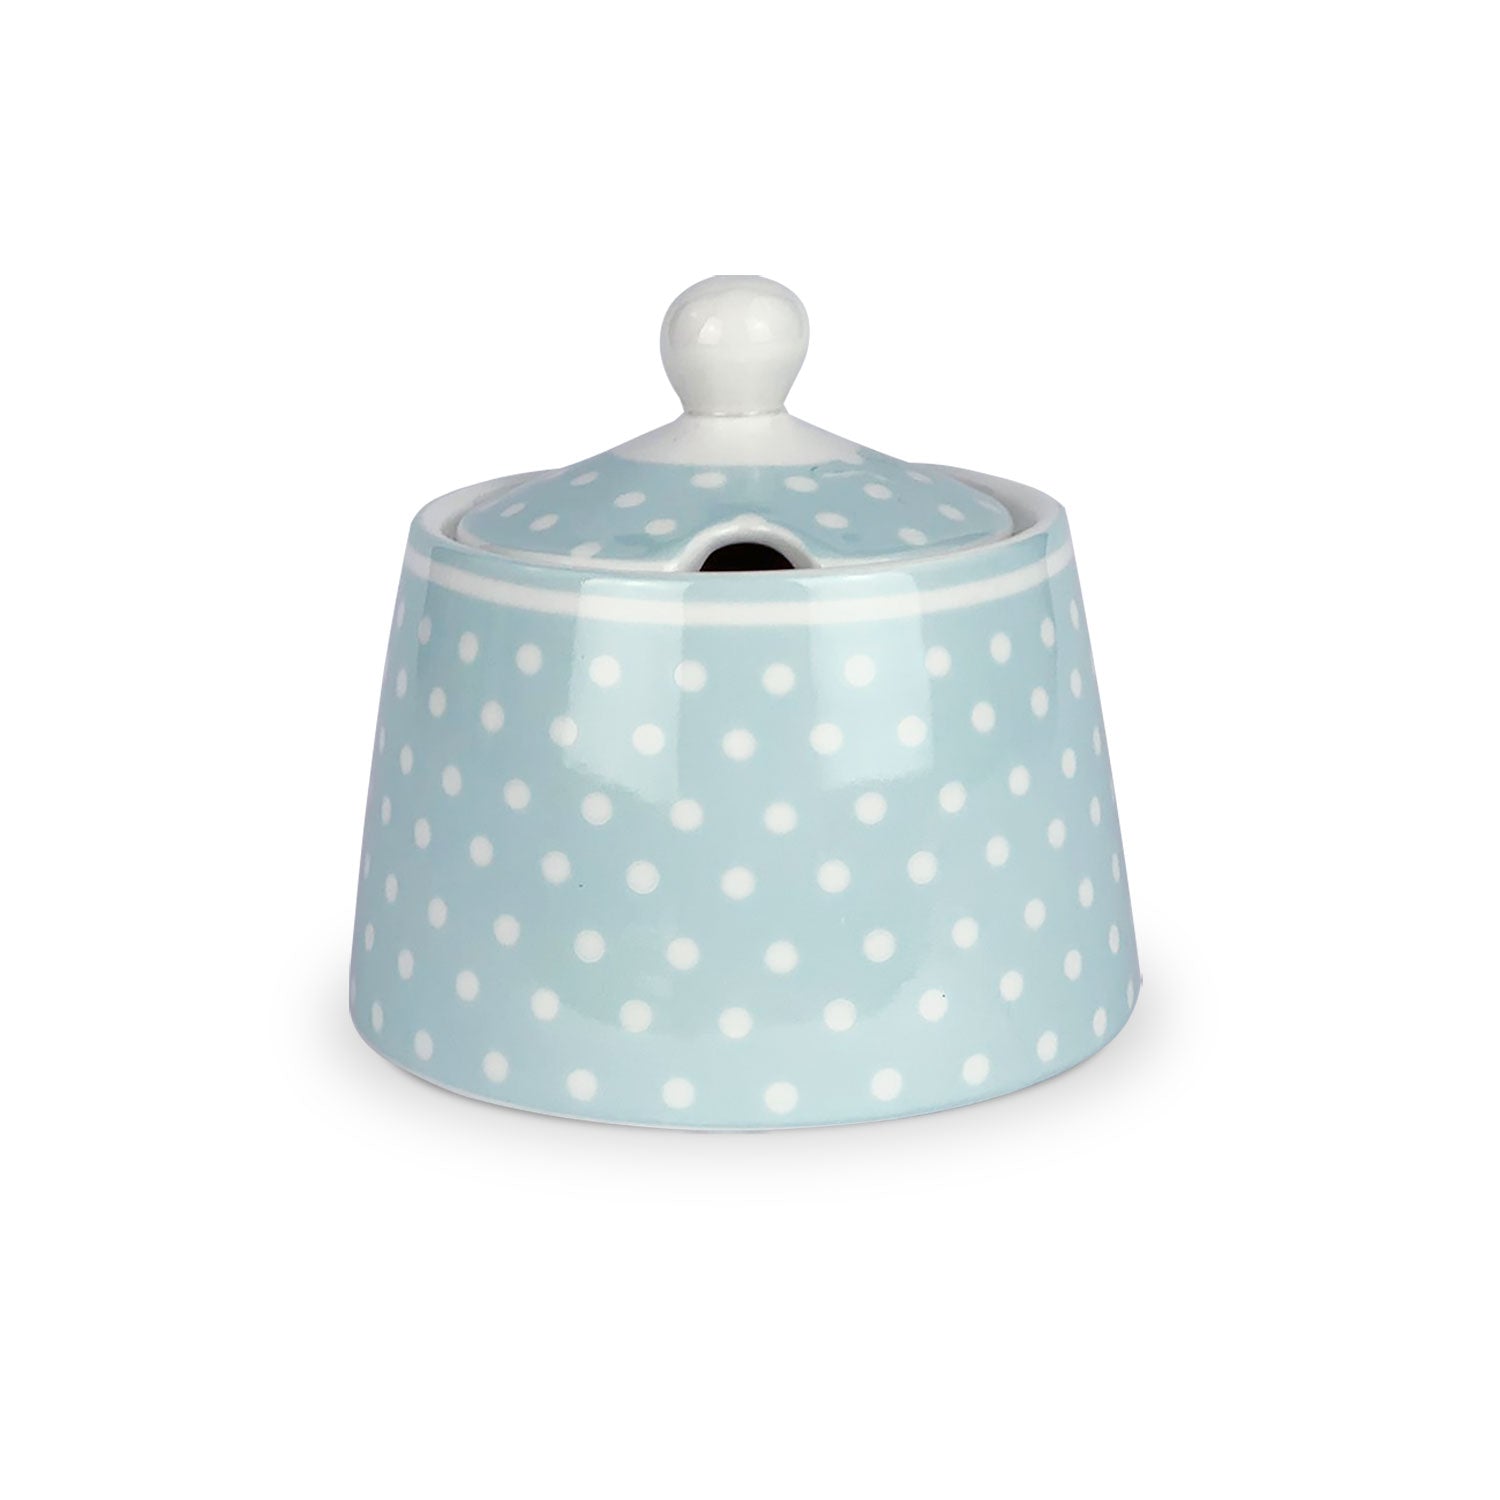 Zuccheriera in porcellana Isabelle Rose a pois Shabby chic rotonda 5068